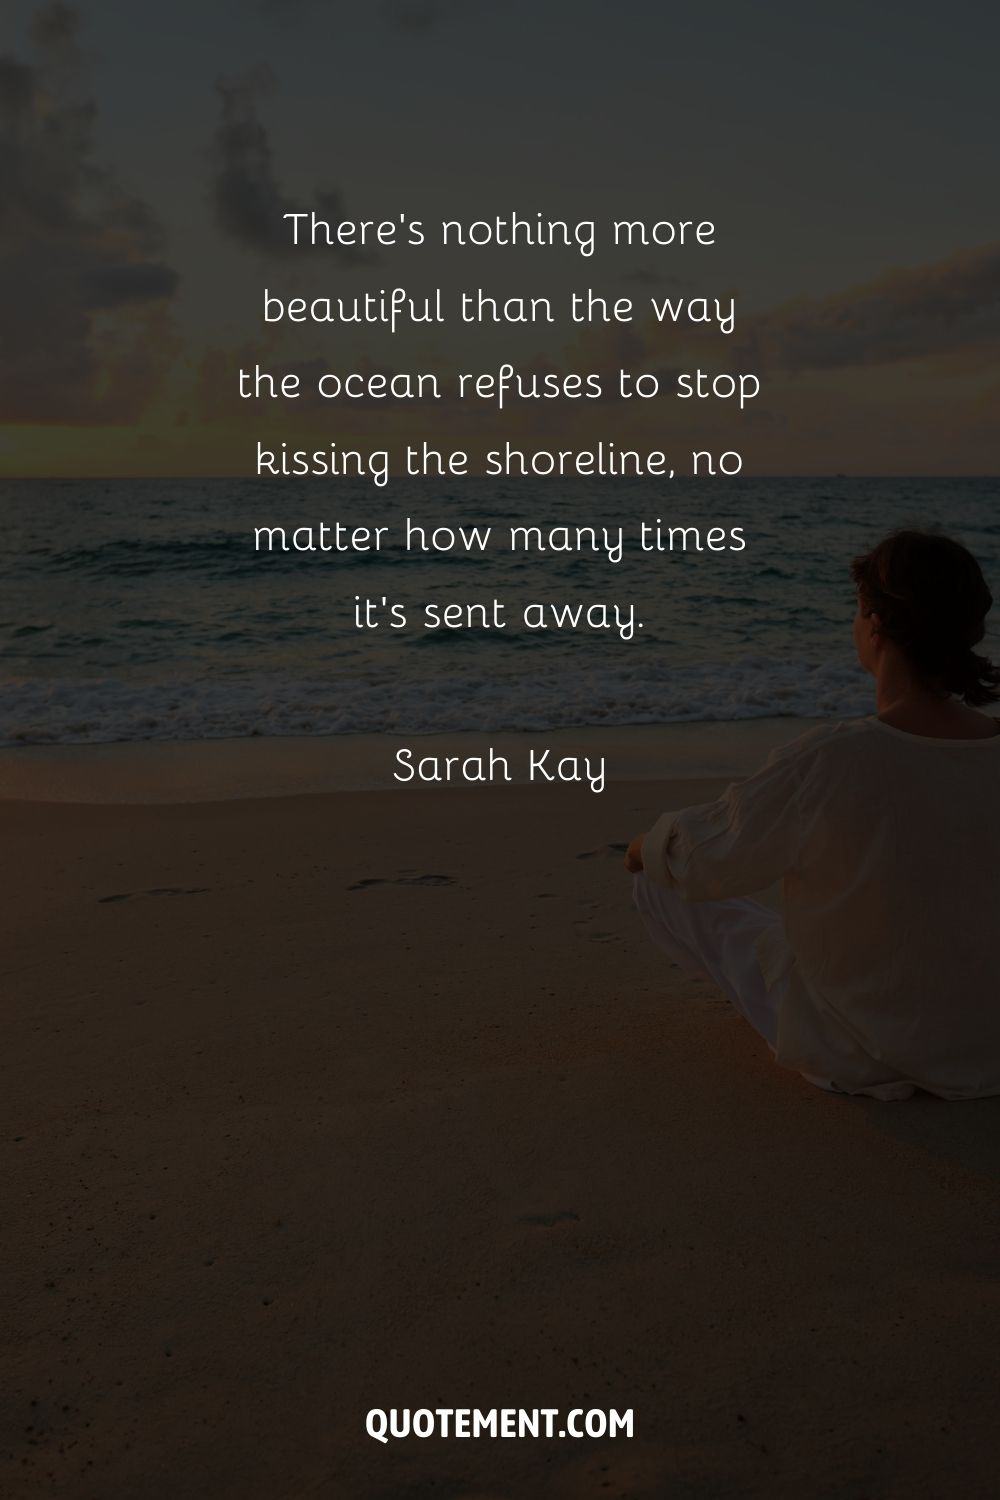 There’s nothing more beautiful than the way the ocean refuses to stop kissing the shoreline, no matter how many times it’s sent away. – Sarah Kay